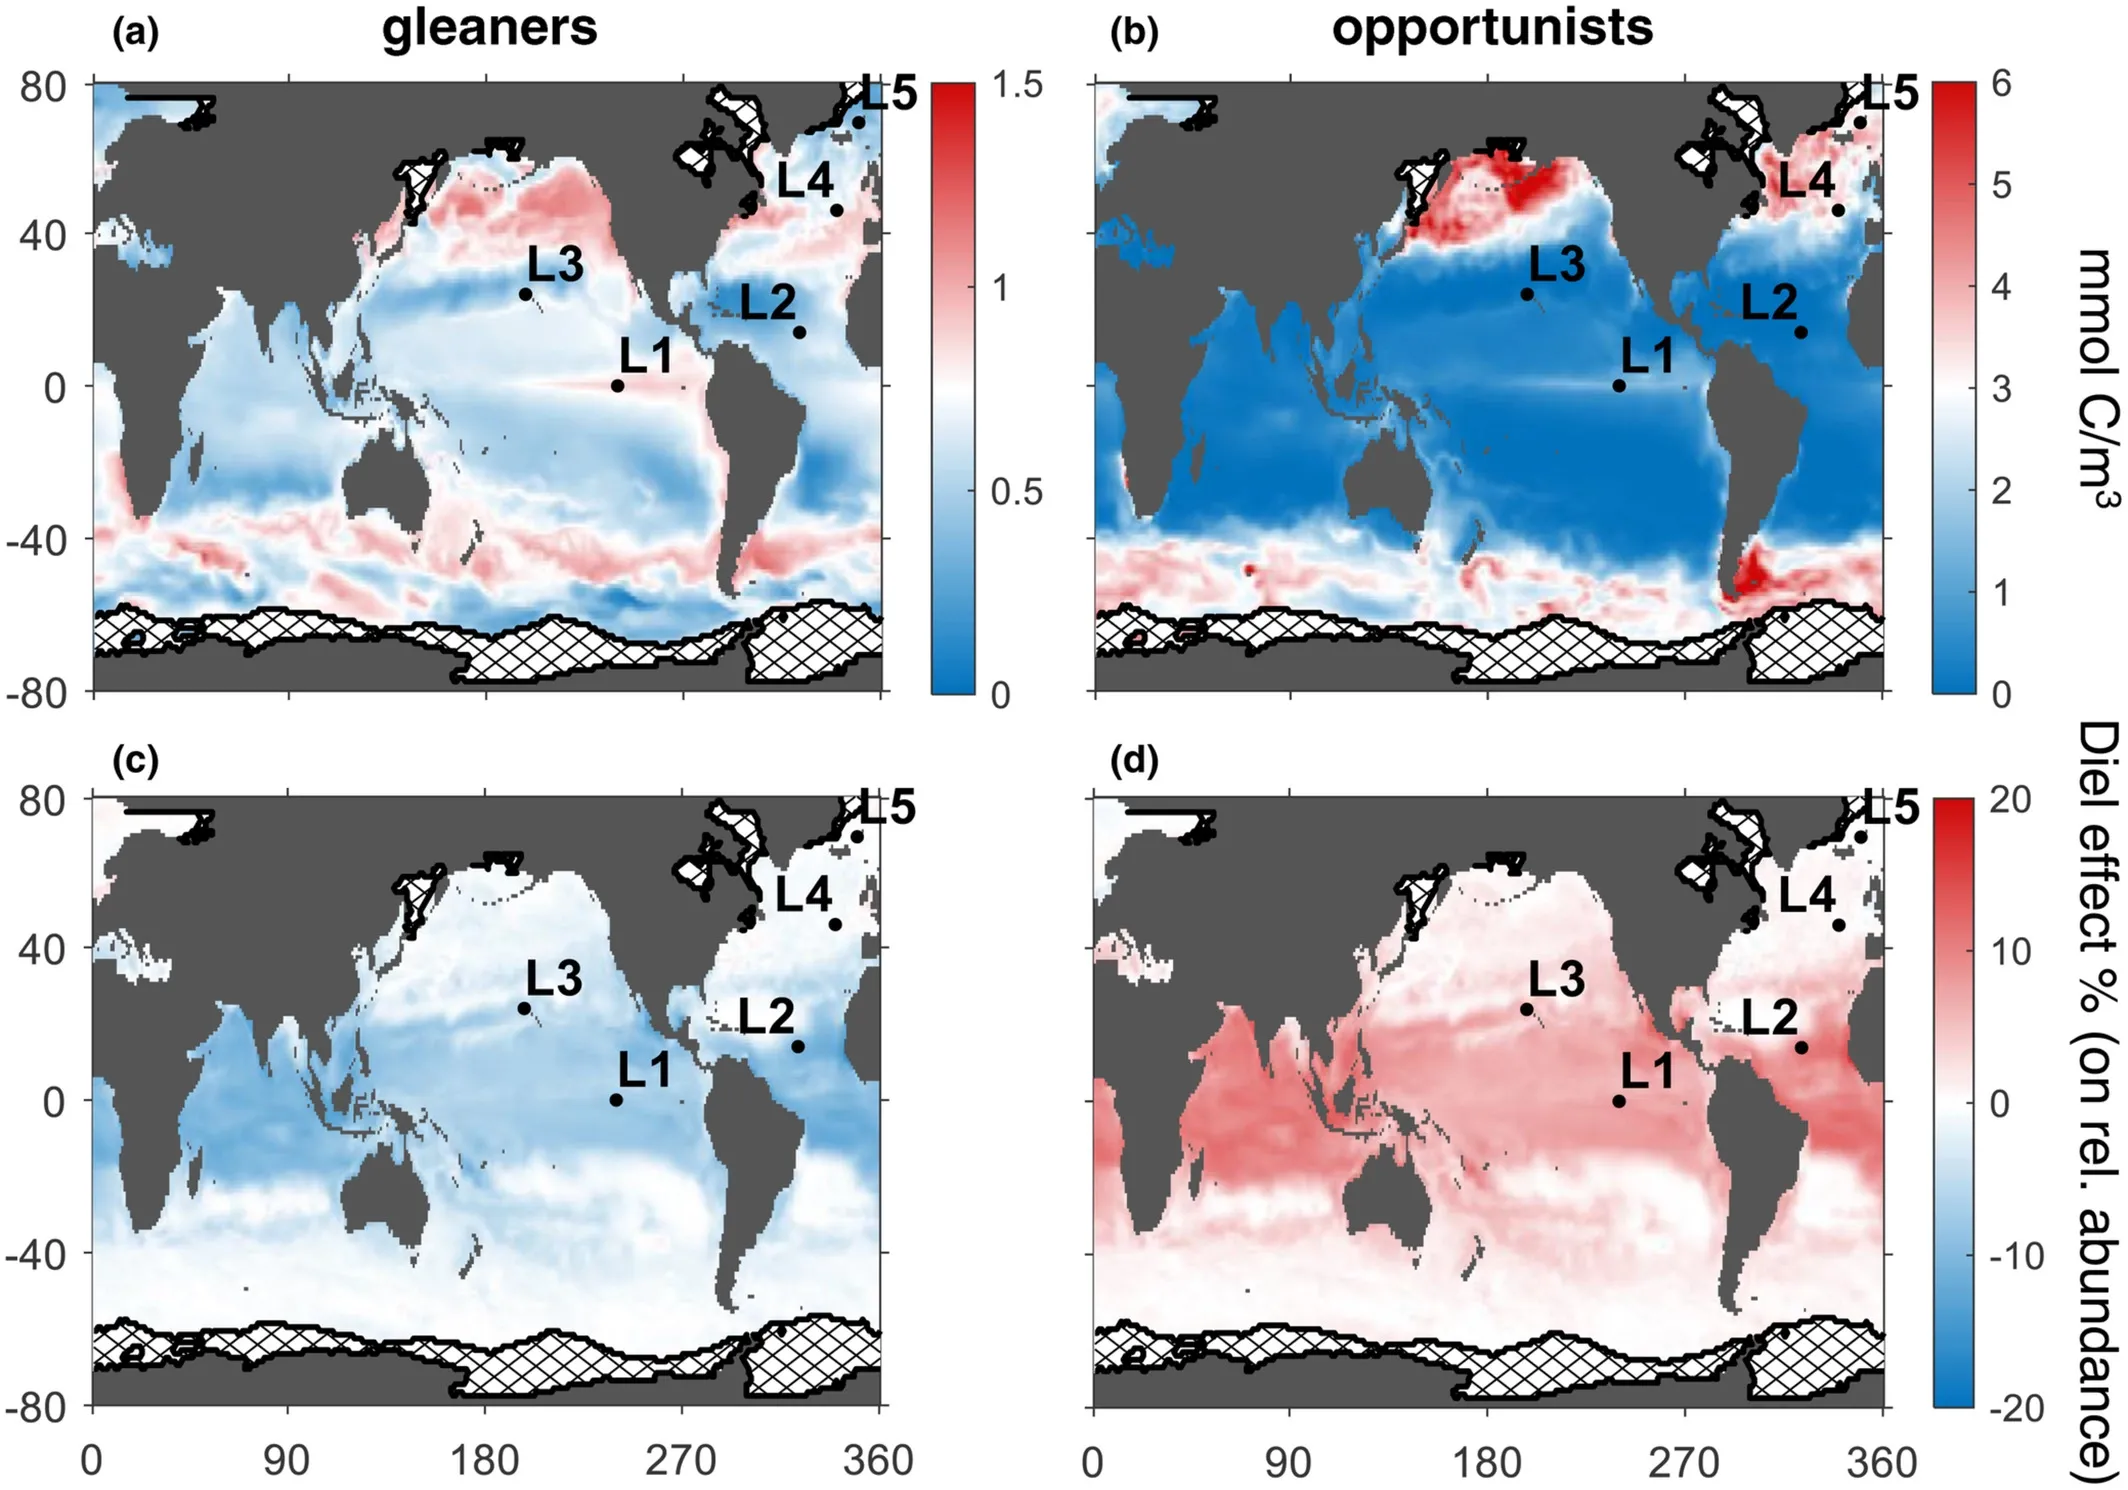 A figure from the described paper showing four different maps. It shows the difference between gleaners and opporunists simulated phytoplankton types in relation to diel cycles and nutrient availability